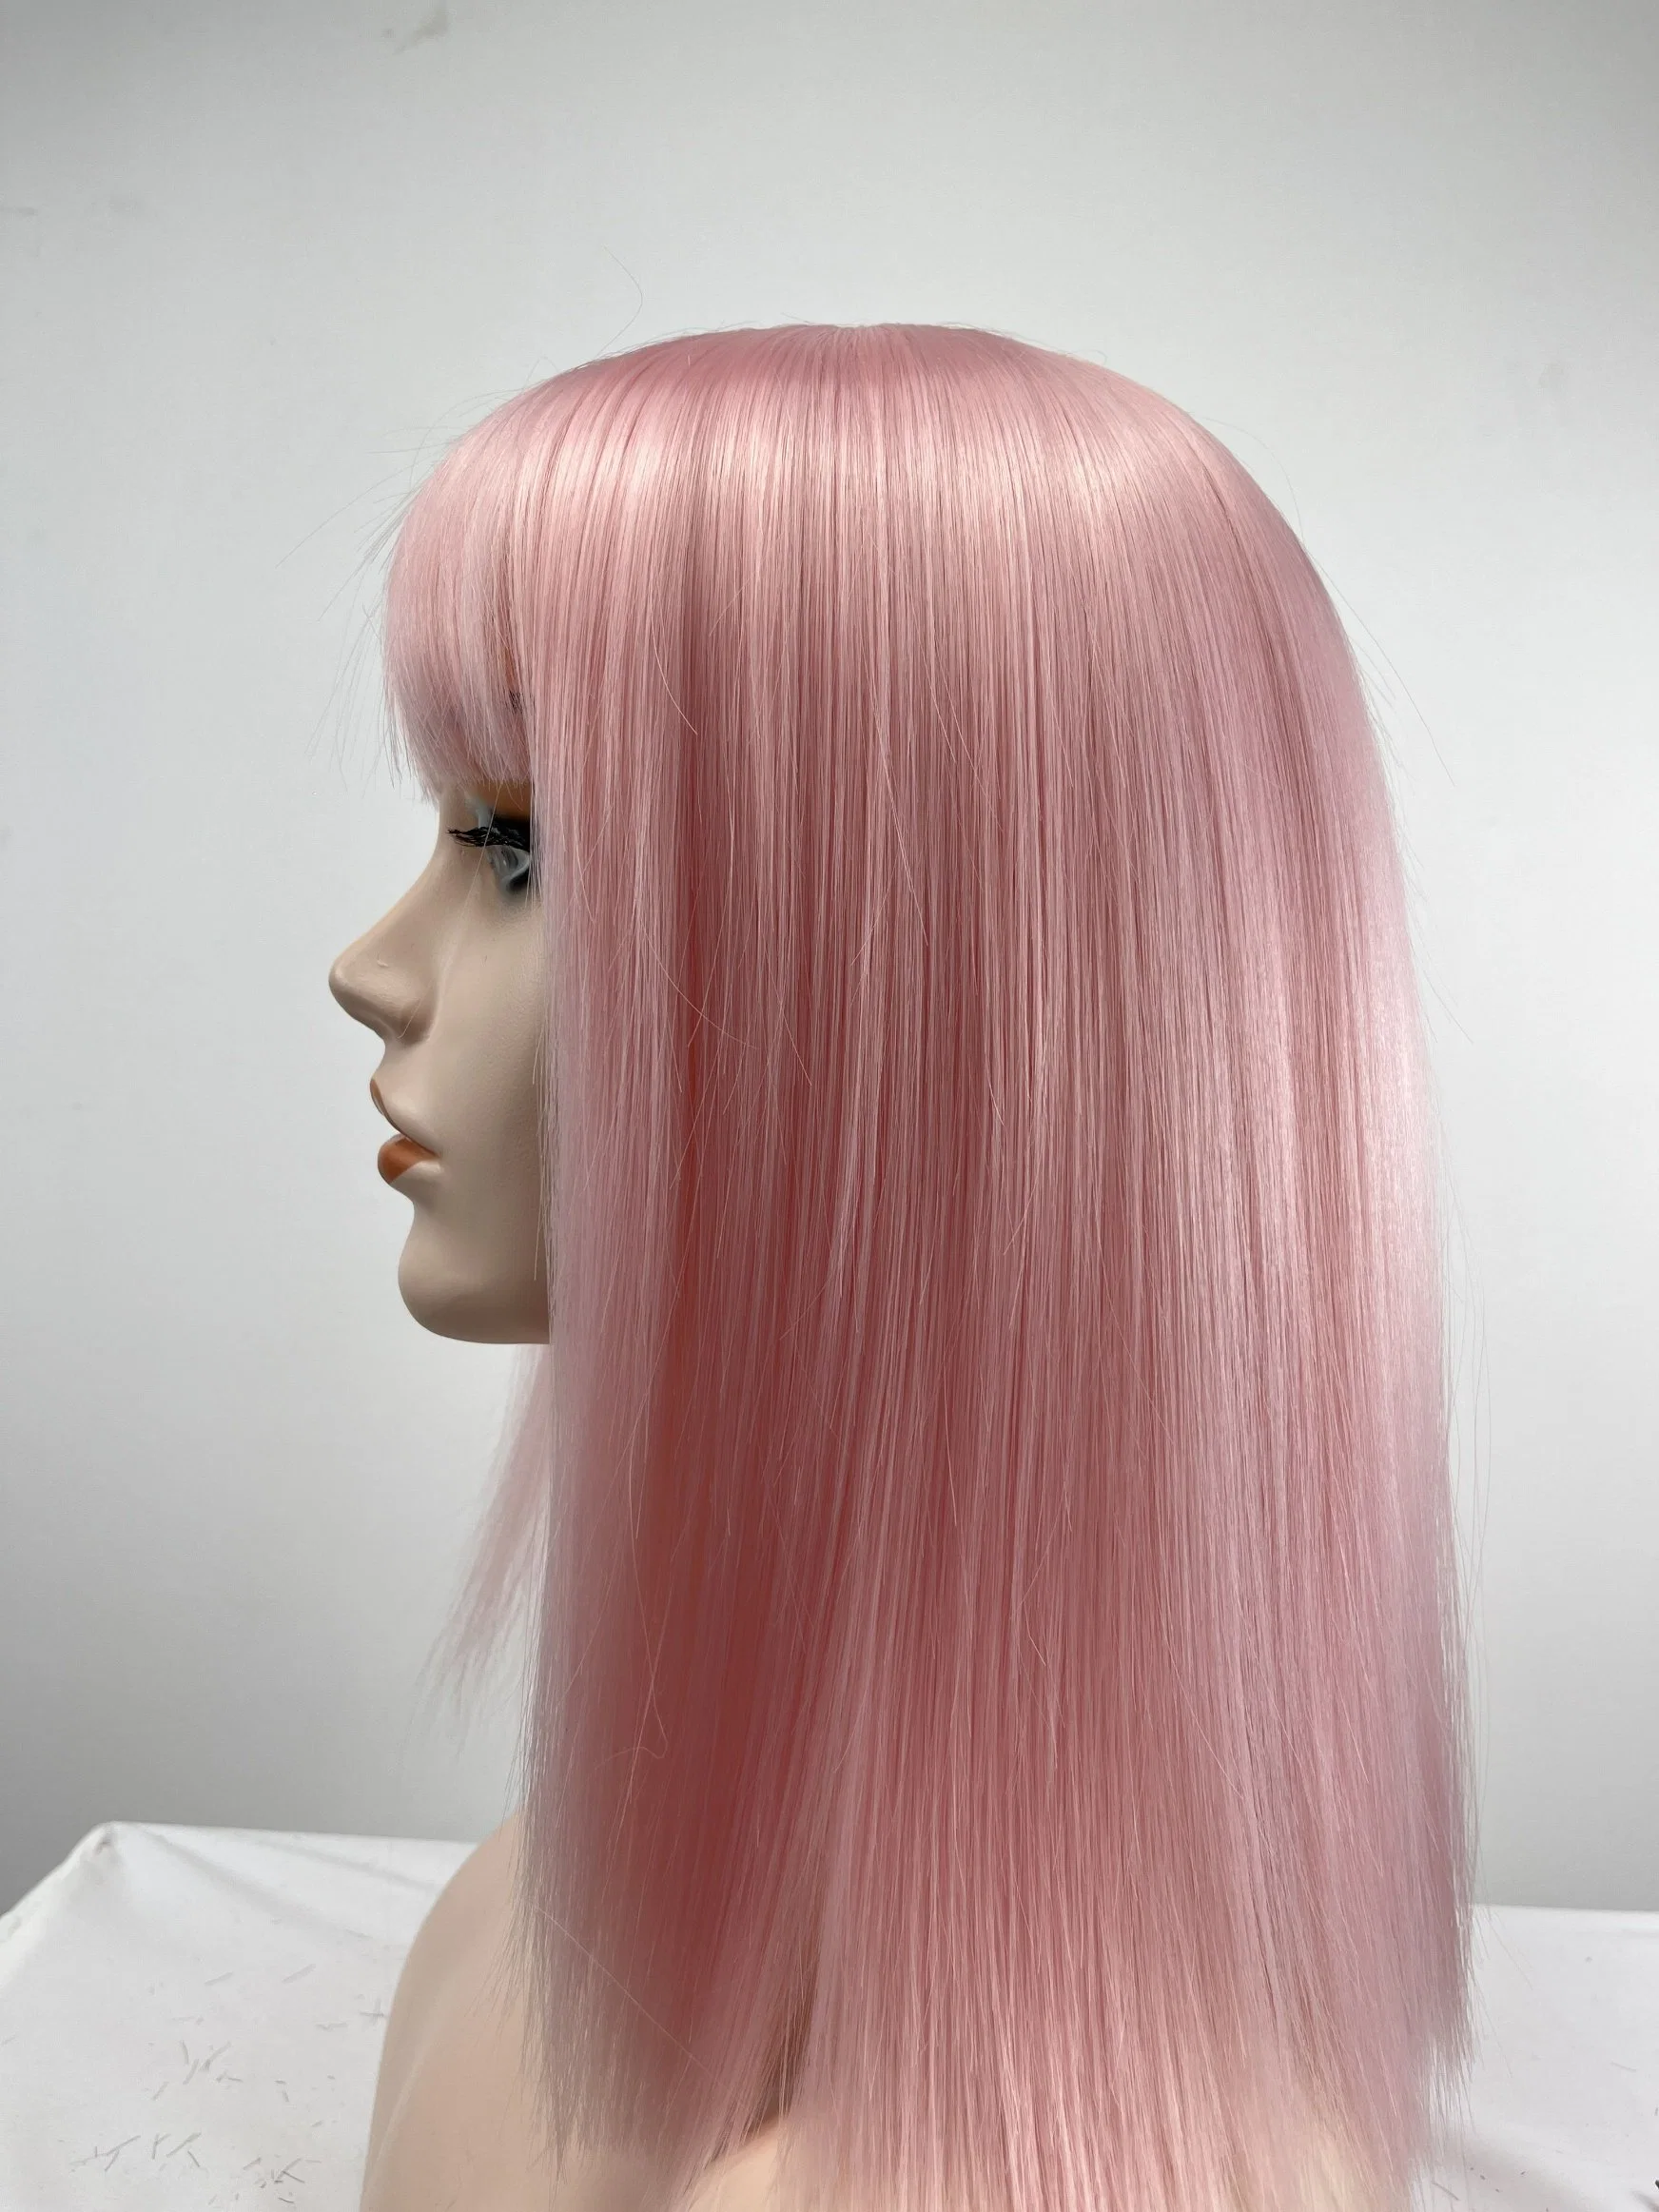 Wholesale/Supplier Party Synthetic Wigs Lolita Cosplay Pink Straight Hair Short Bob Wig Sheath with Bangs